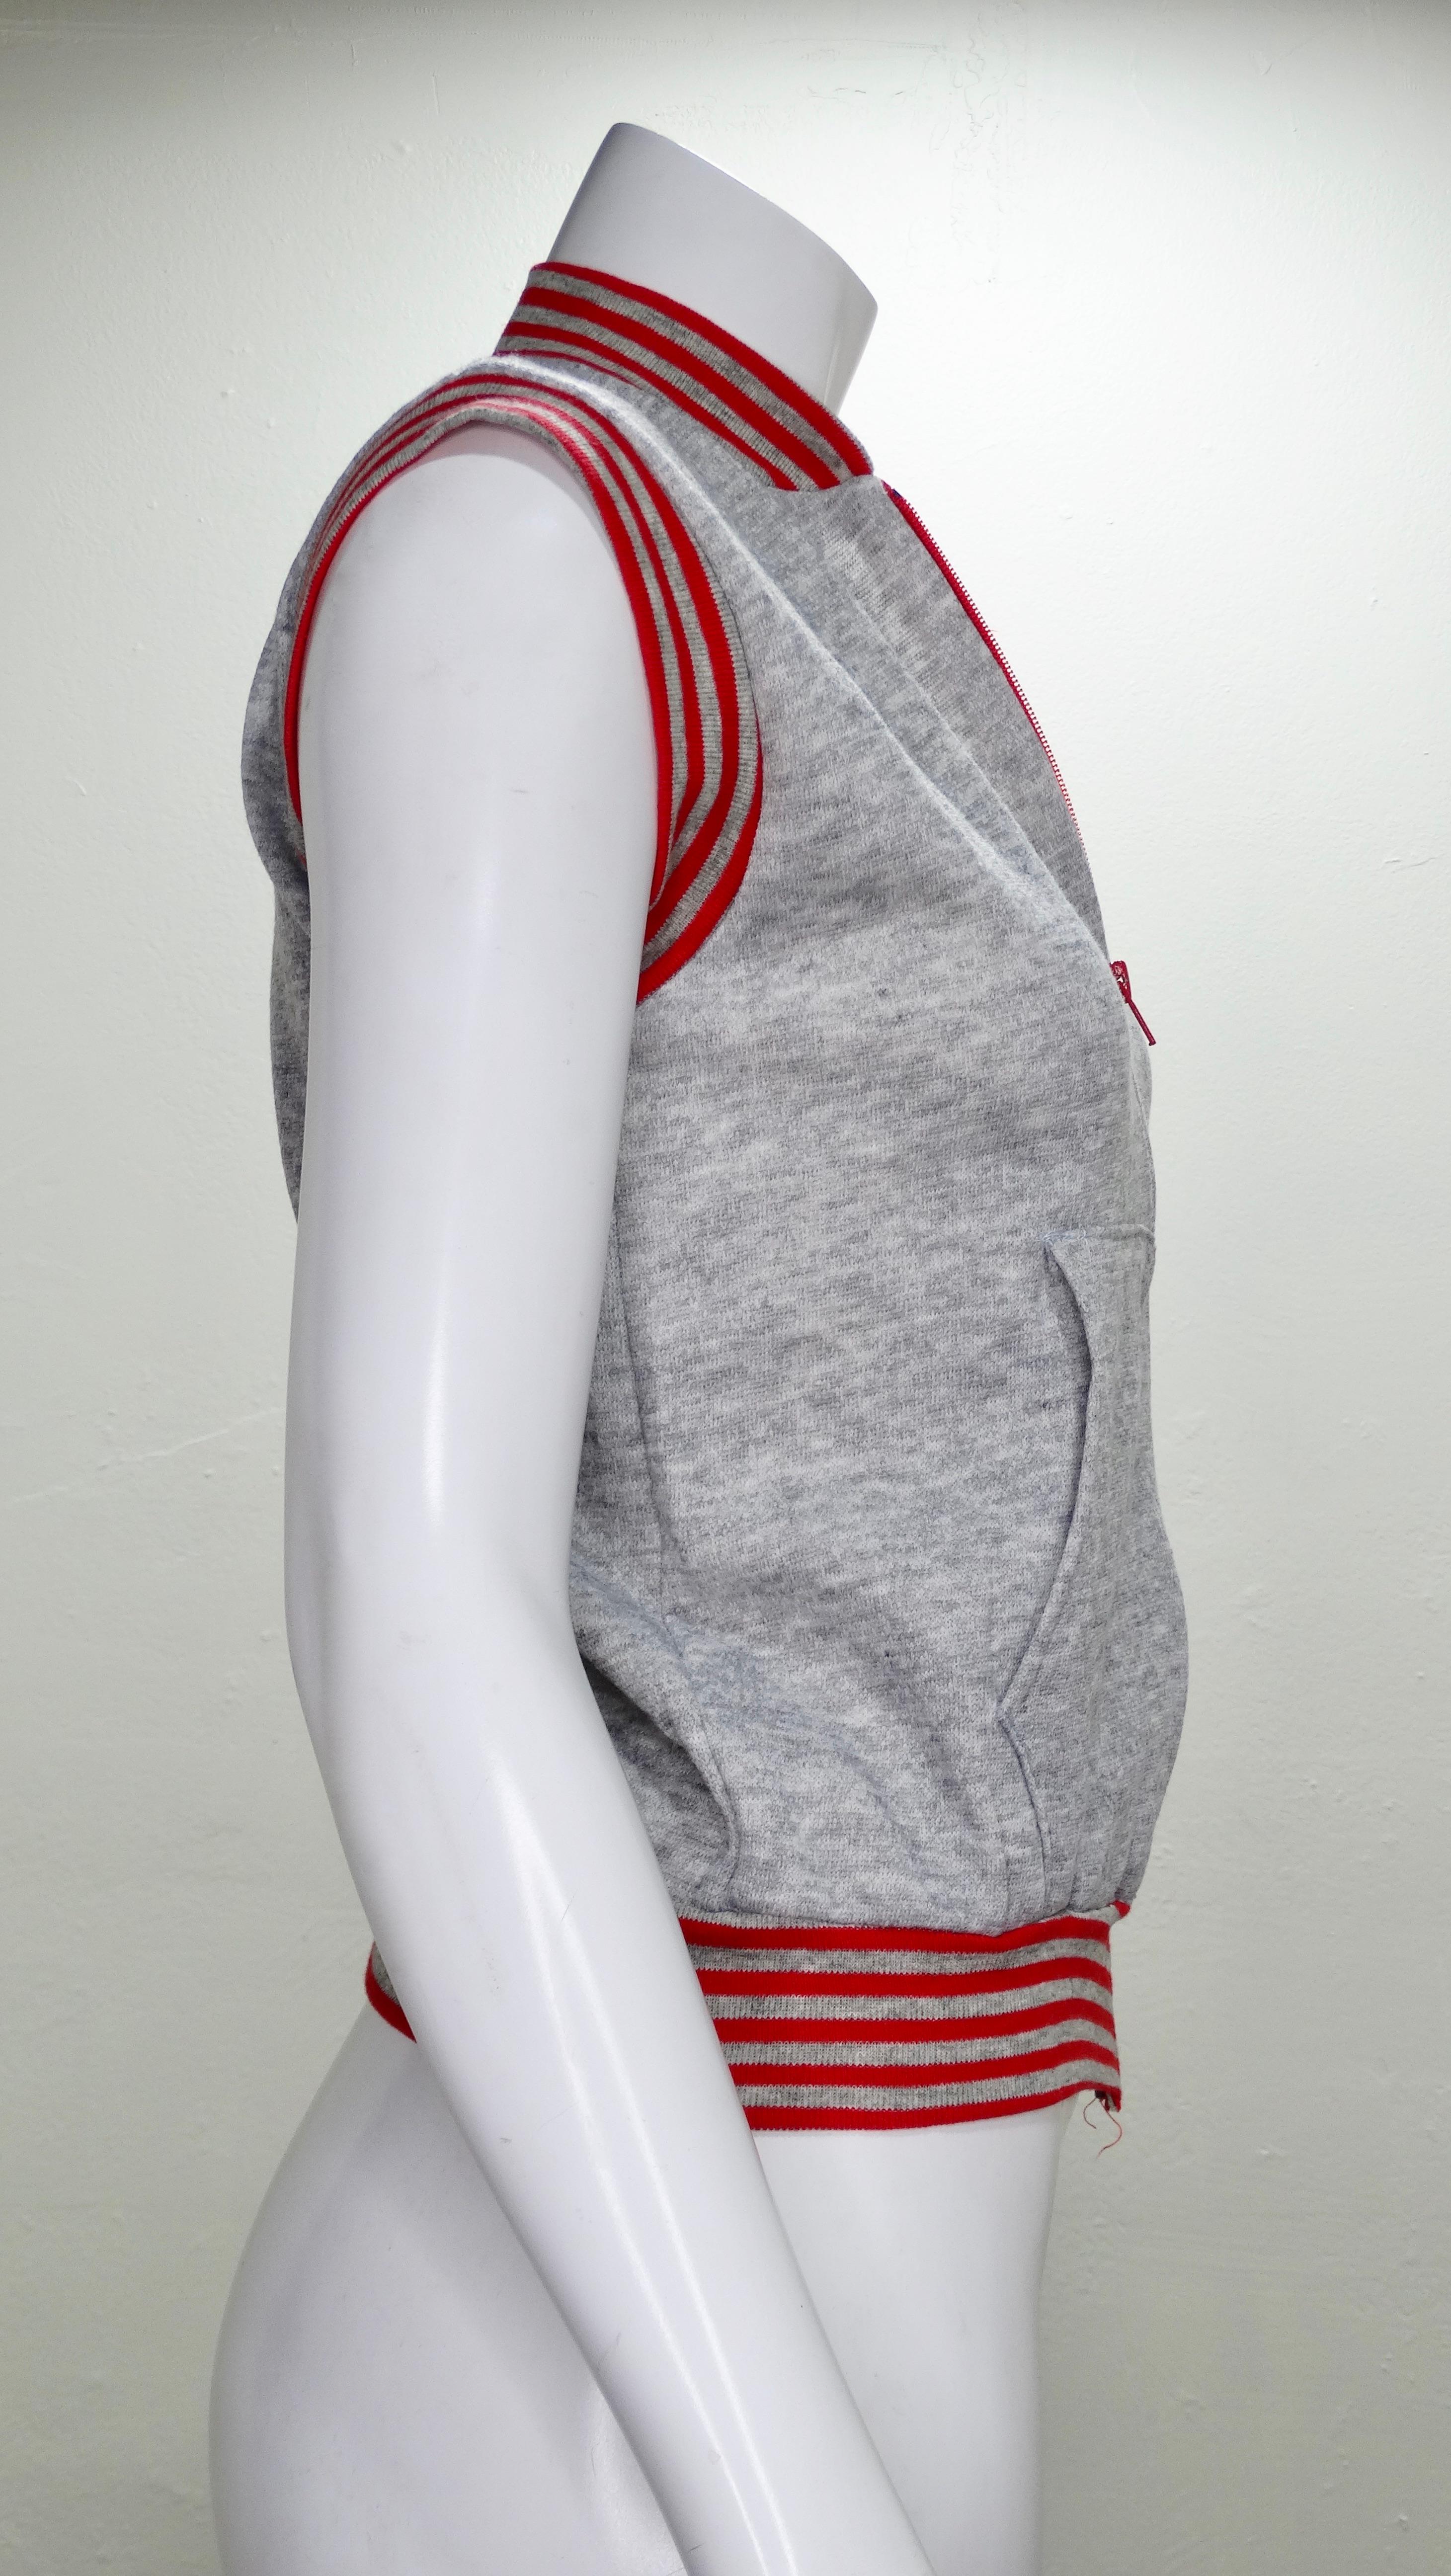 Nobody does it quite like Yves Saint Laurent! Circa early 1970s, this grey vest from YSL's activewear line features a grey and red striped hem, YSL logo on the front, two front pockets and a red zipper closure. Original tag intact, marked a size M